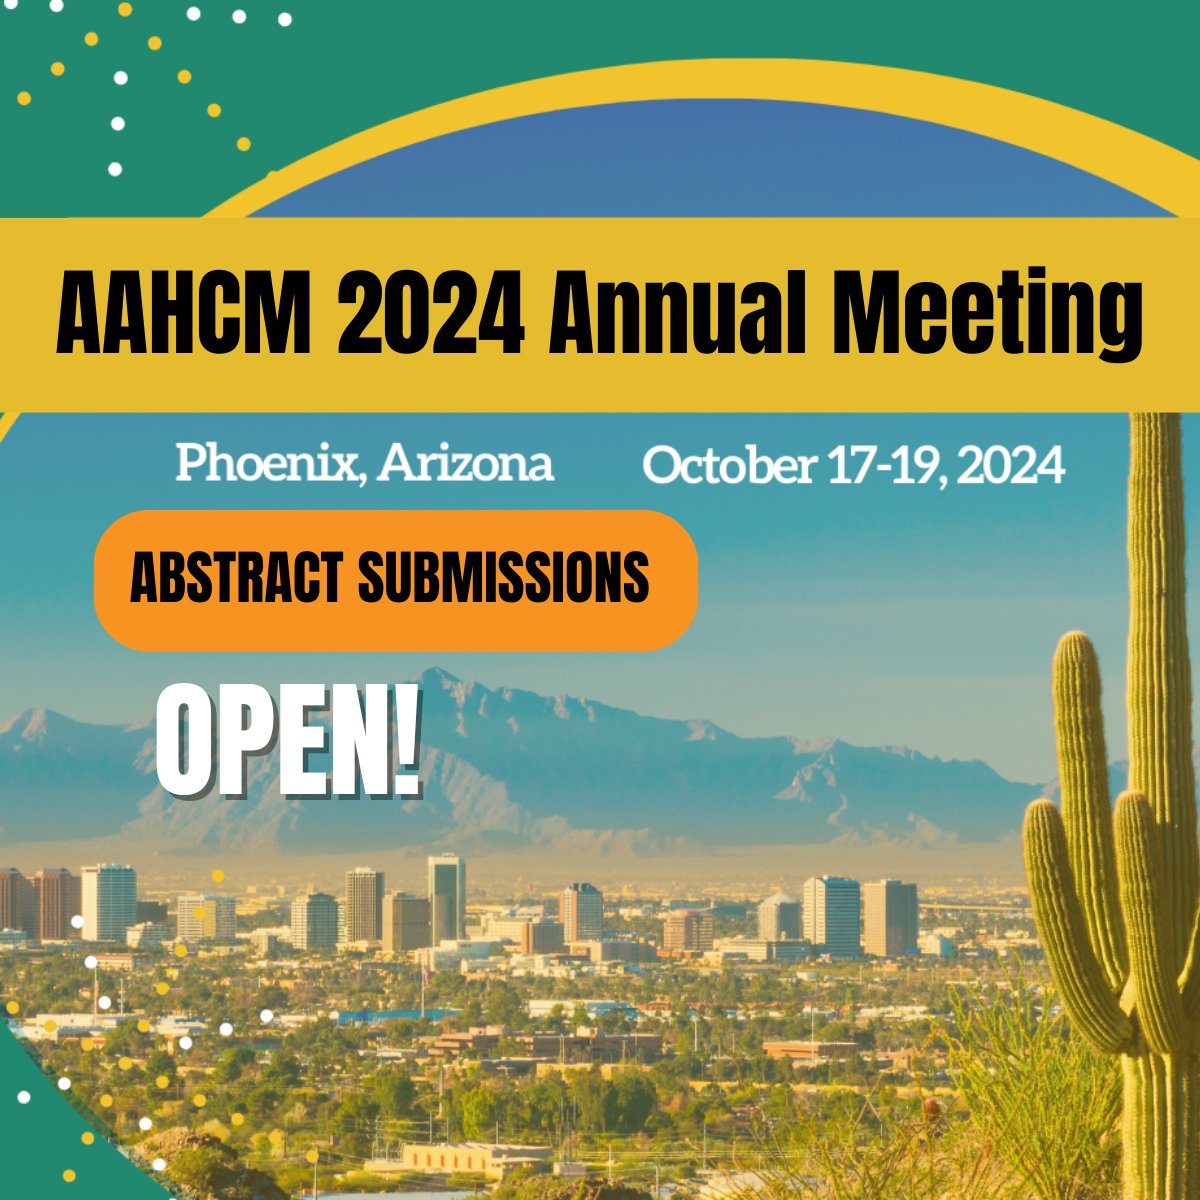 Calling all #presenters! Share your knowledge at #AAHCM2024. Abstract submissions are now open for presentations and posters. The submission deadline is April 1, 2024. aahcm.memberclicks.net/annual-meeting…